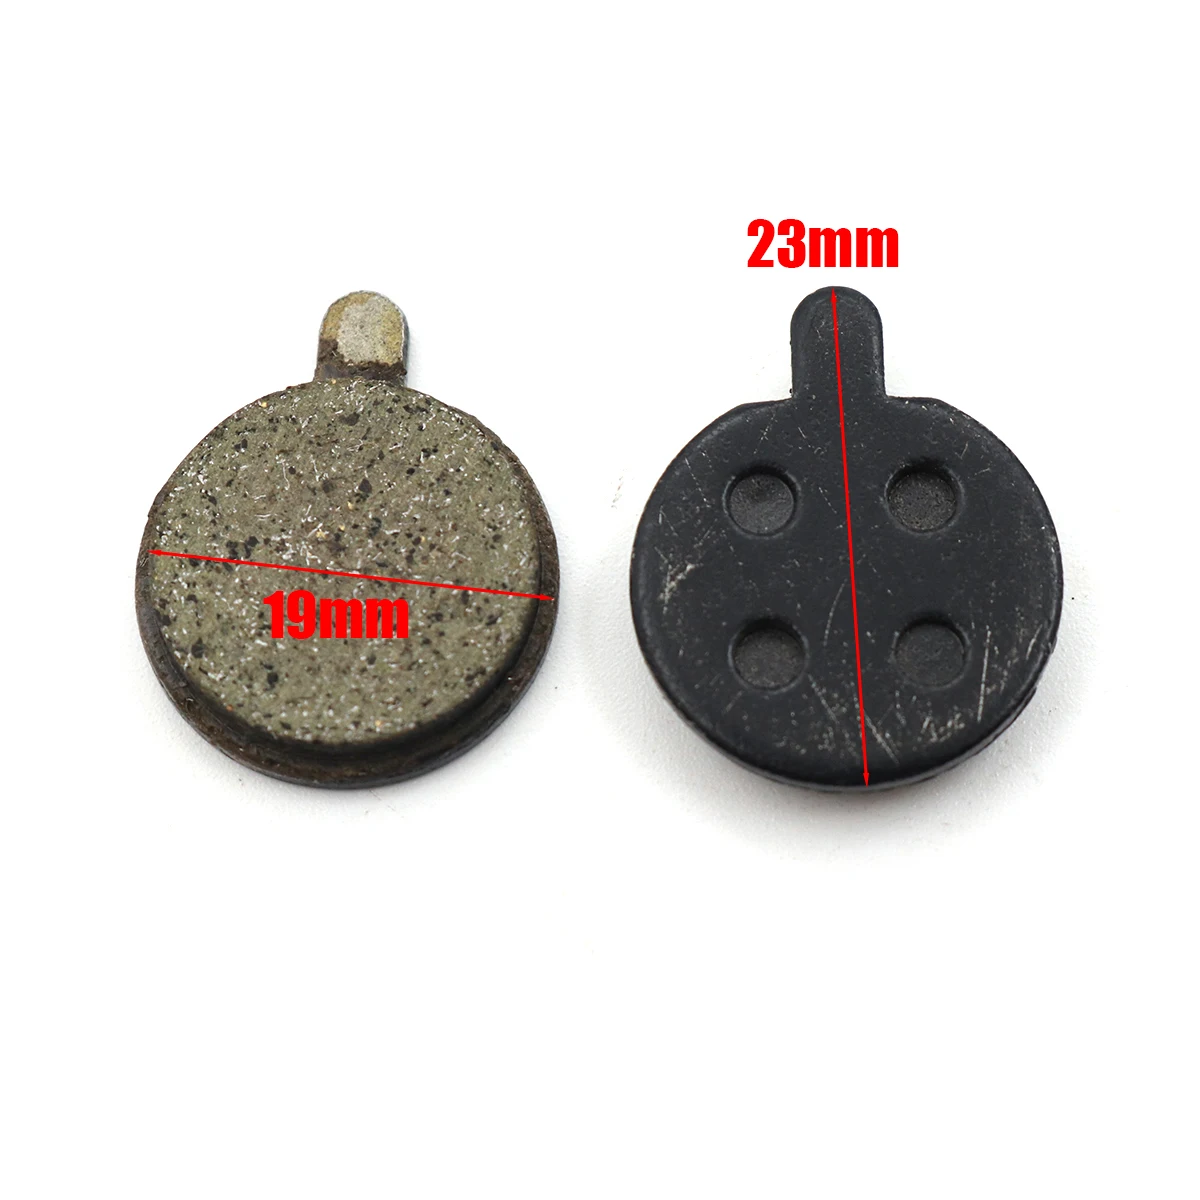 

2pcs Brake Pads for Xiaomi M365 PRO Electric Scooter Rear Wheel Mijia Pro Brake Disc Friction Plates Pads Scooter Accessories